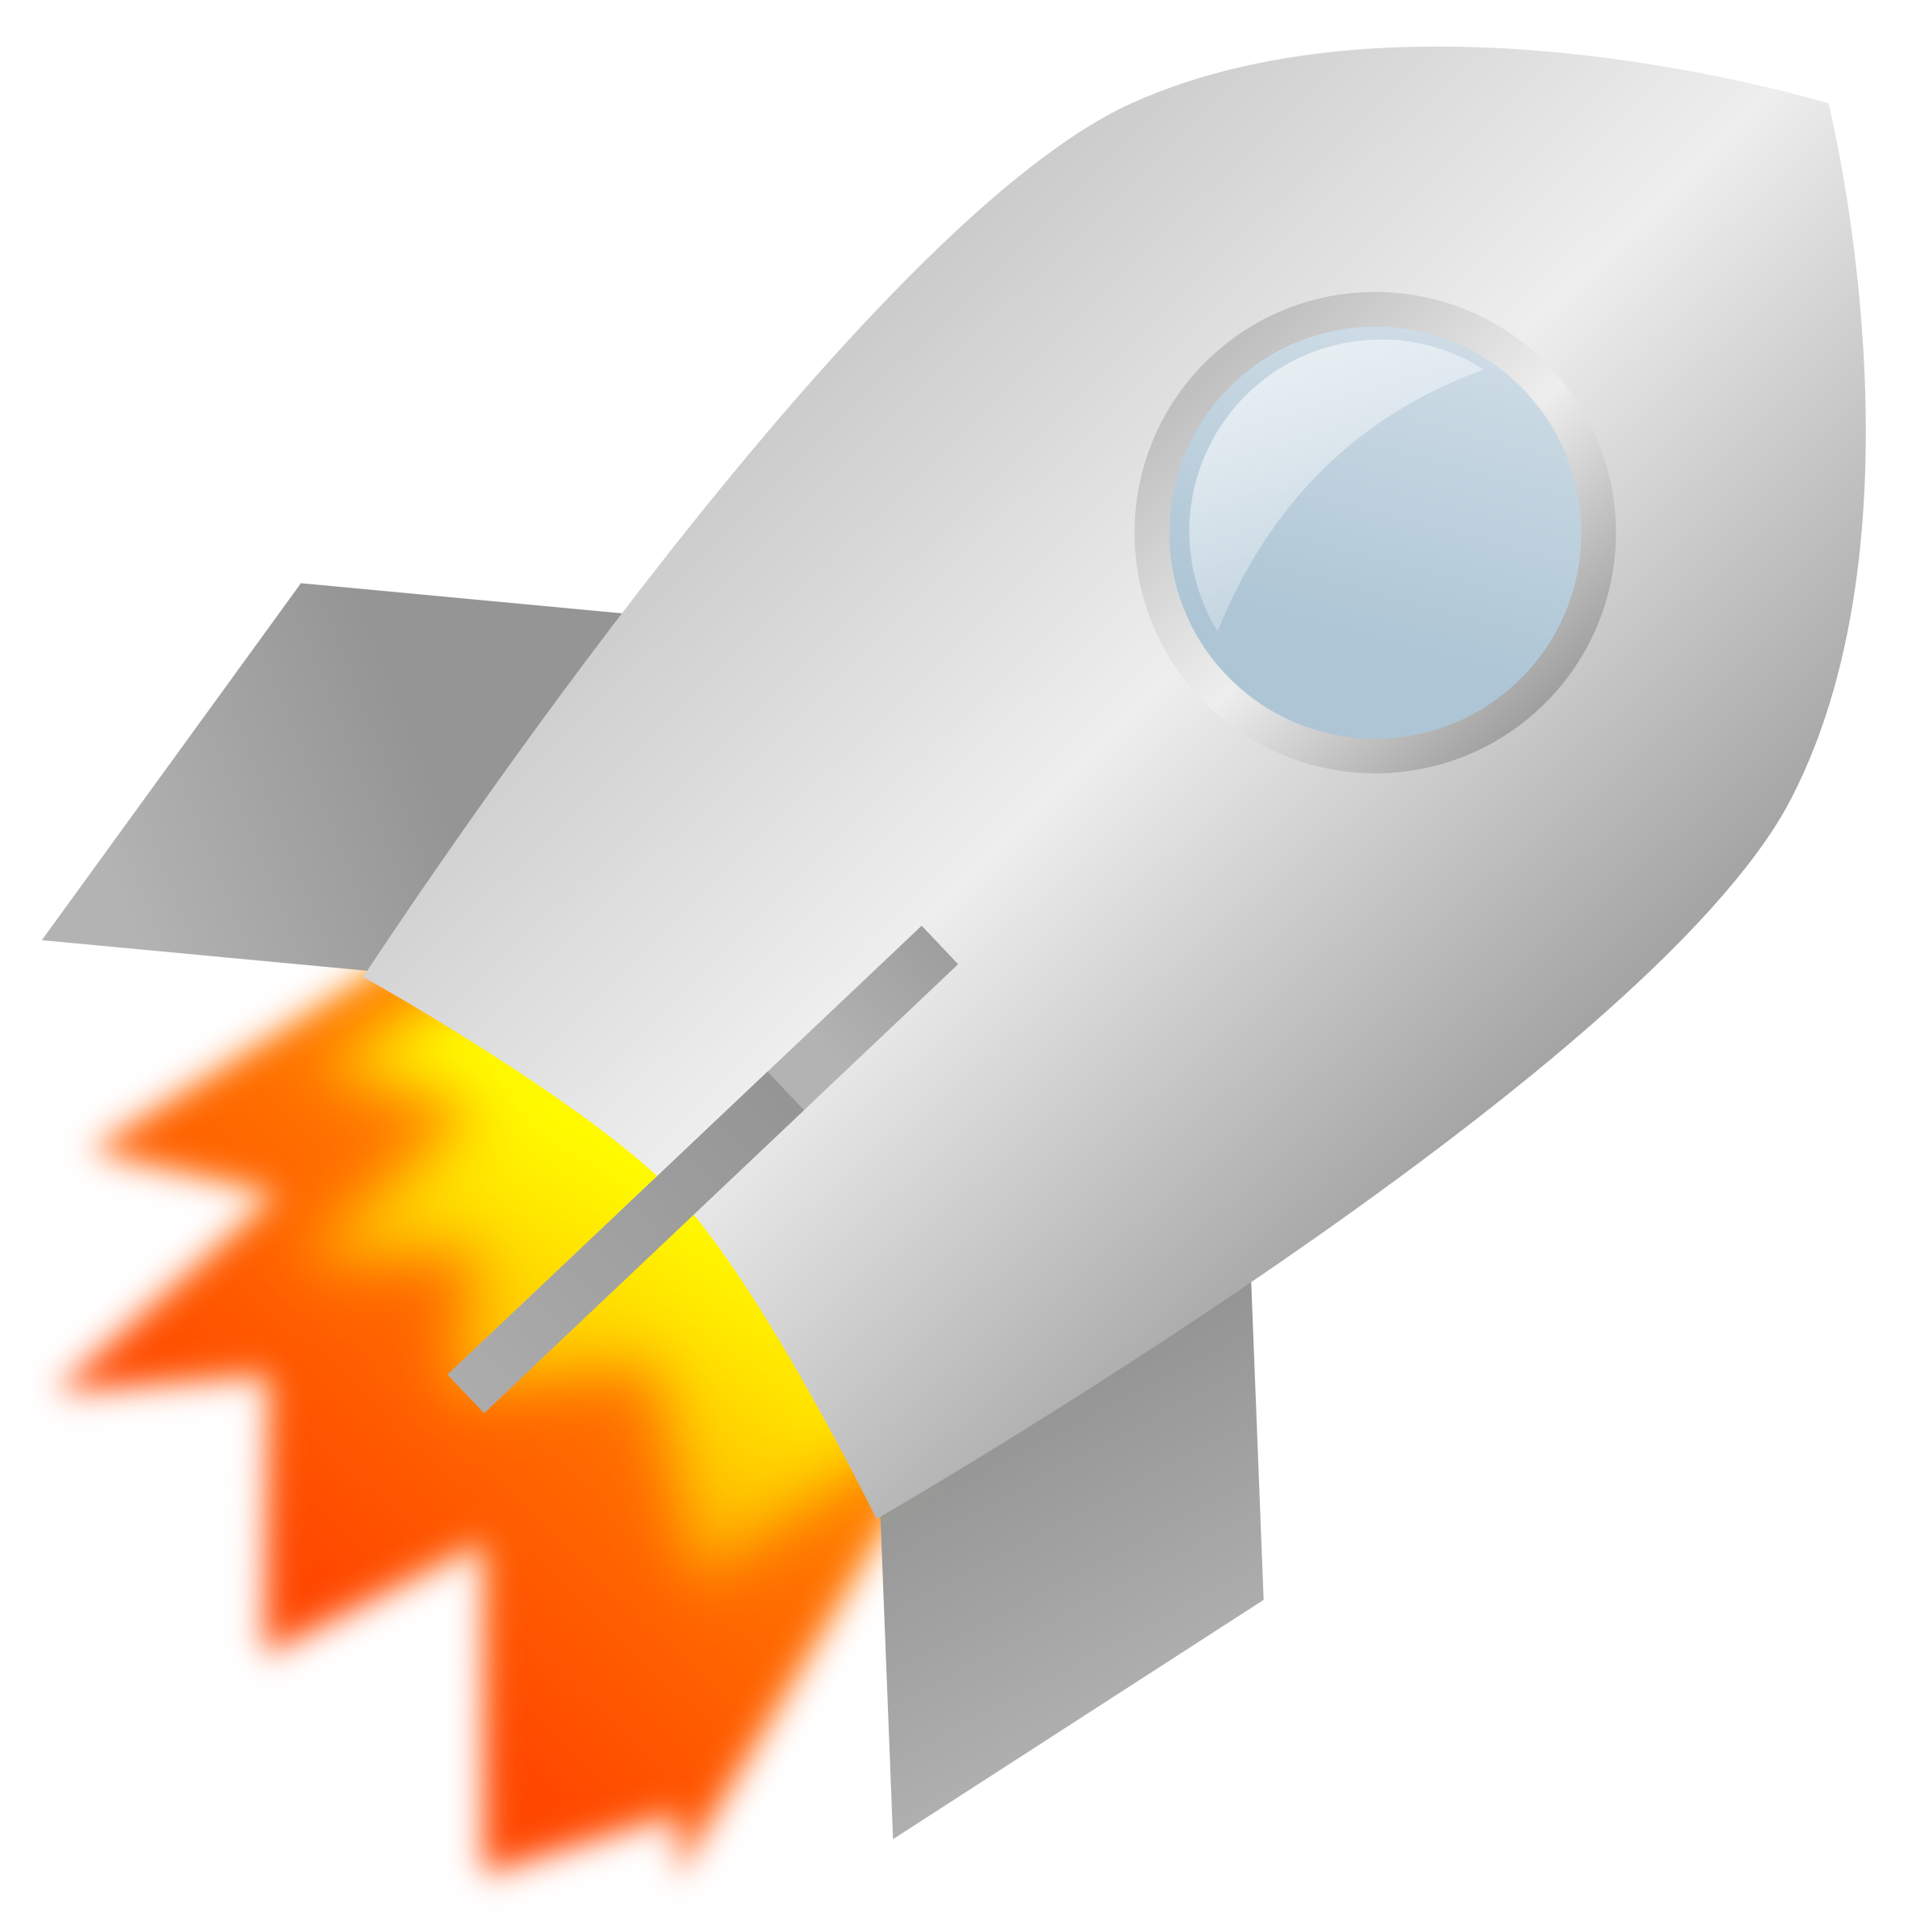 Toy big image png. Spaceship clipart rocket booster